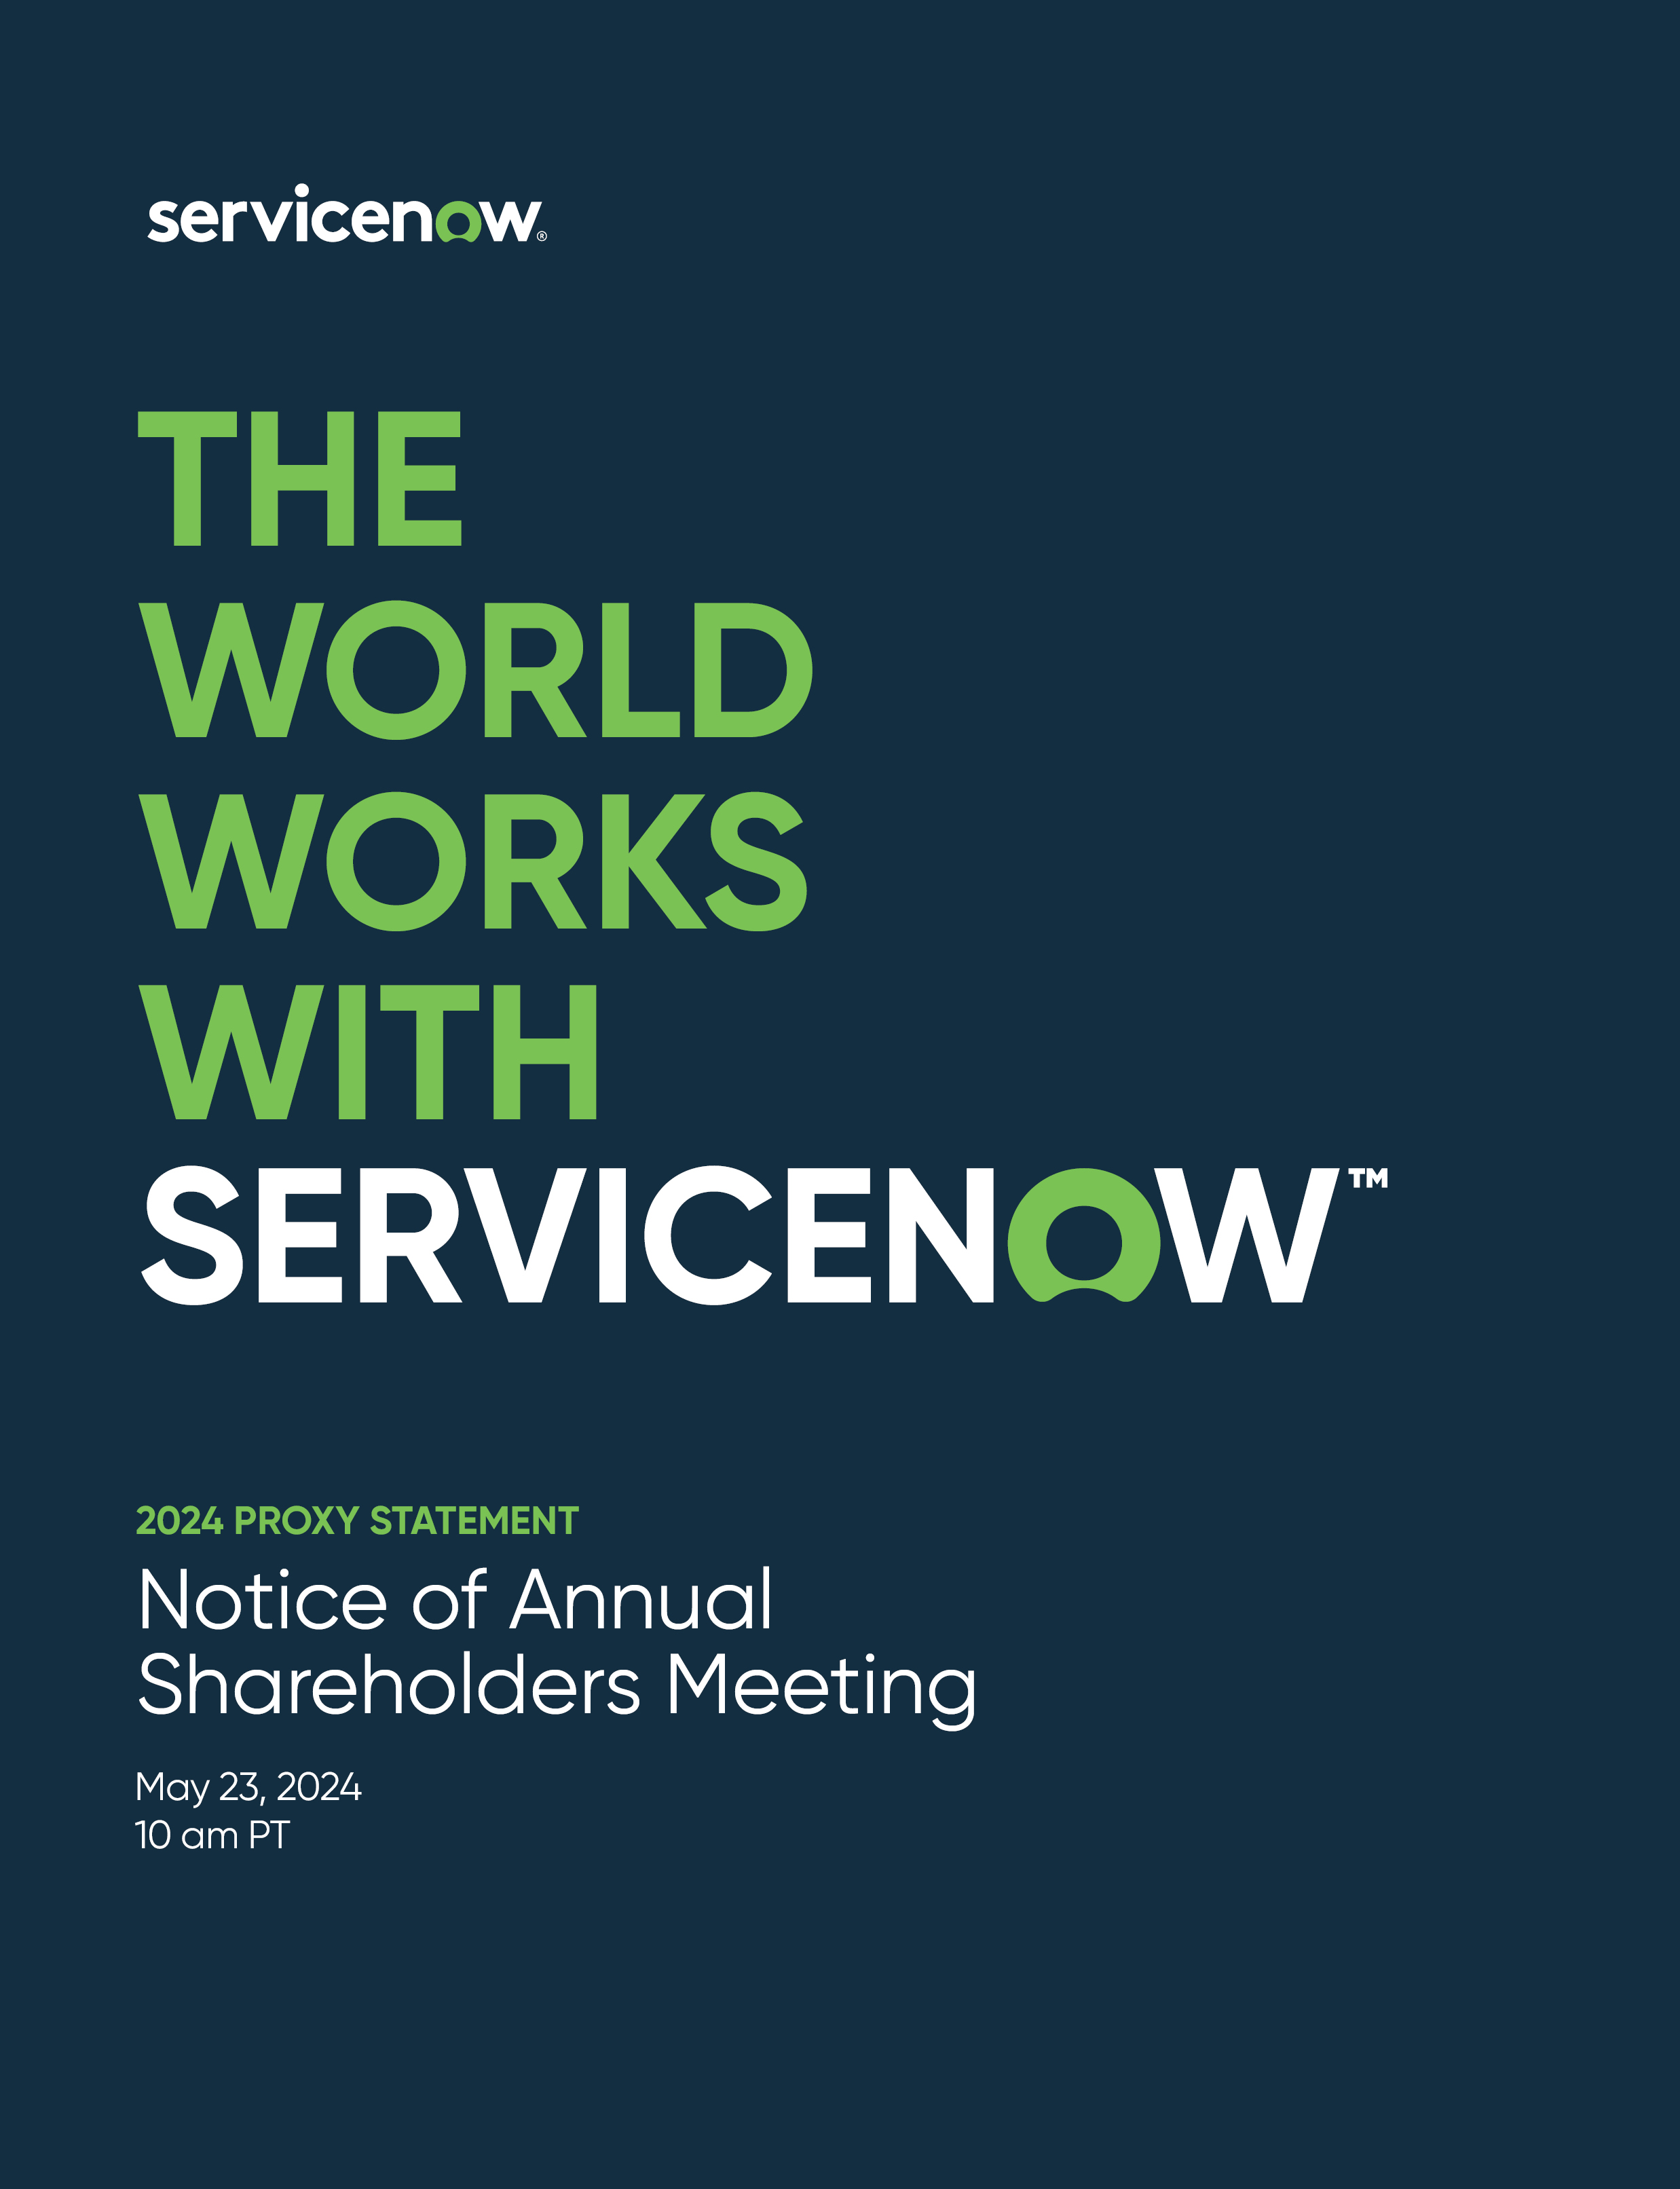 01_424307-1_covers_ServiceNow_Covers_REV_3.jpg